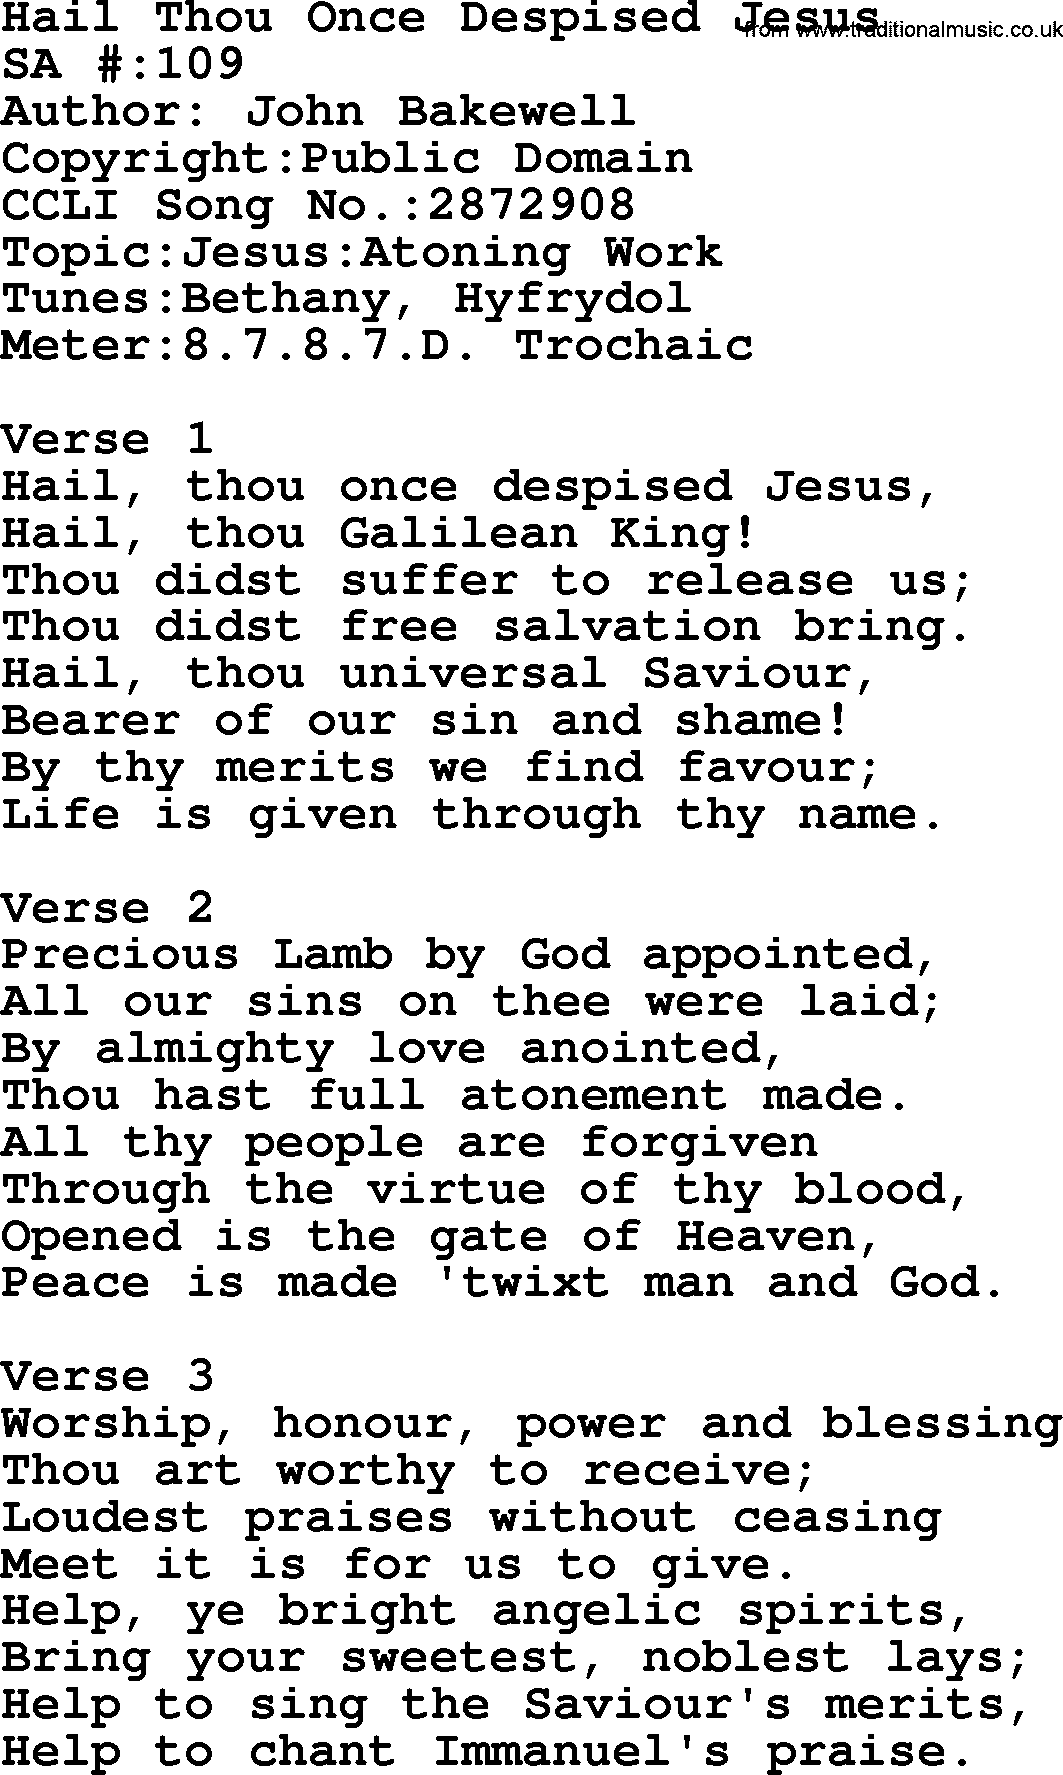 Salvation Army Hymnal, title: Hail Thou Once Despised Jesus, with lyrics and PDF,